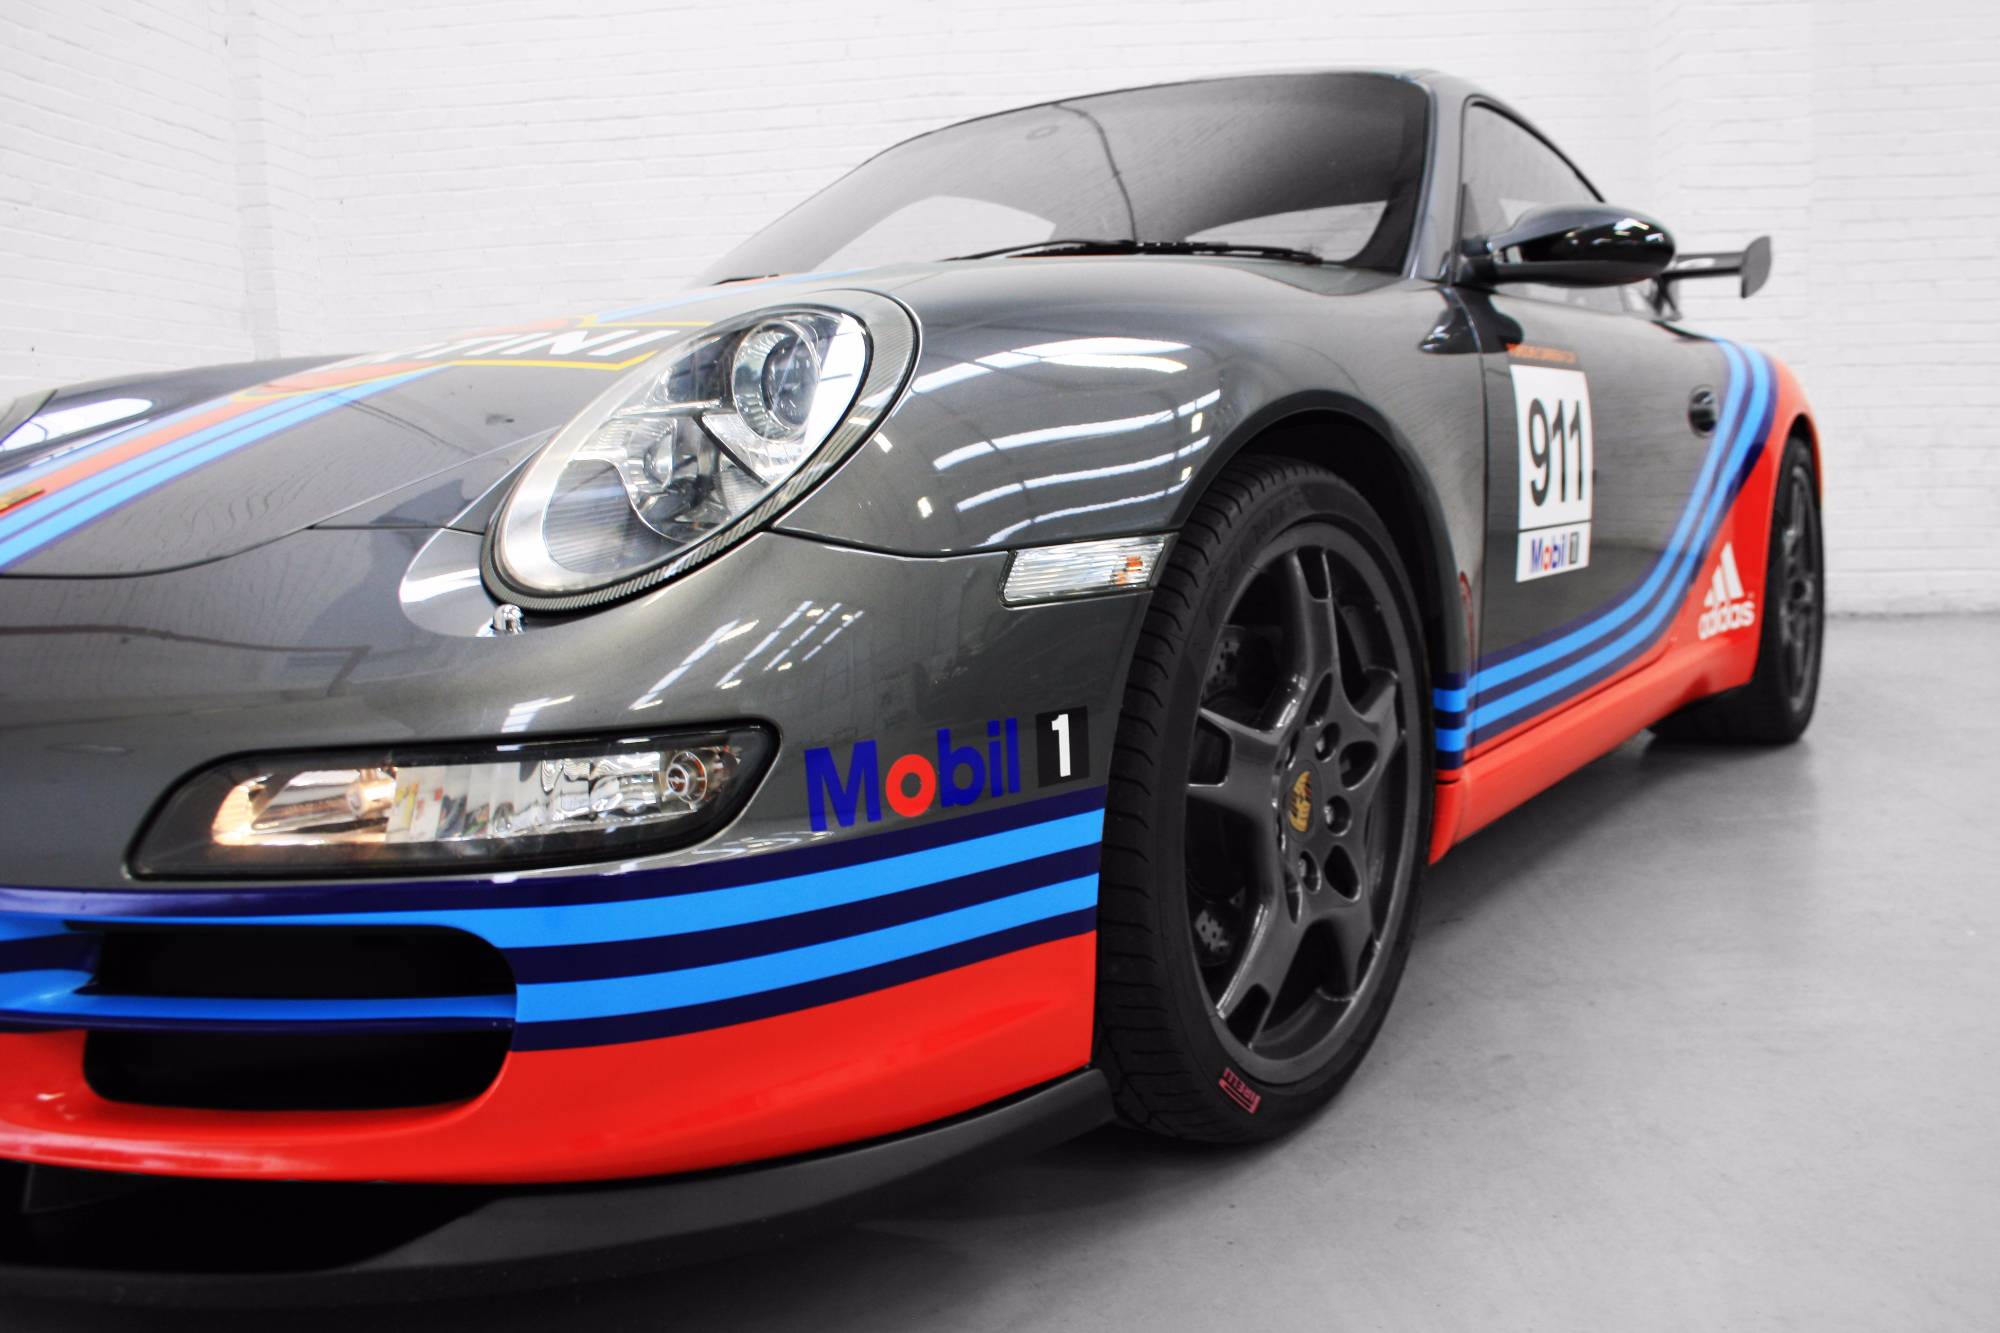 Porsche 997 - Martini Racing Livery - Personal Wrapping Project